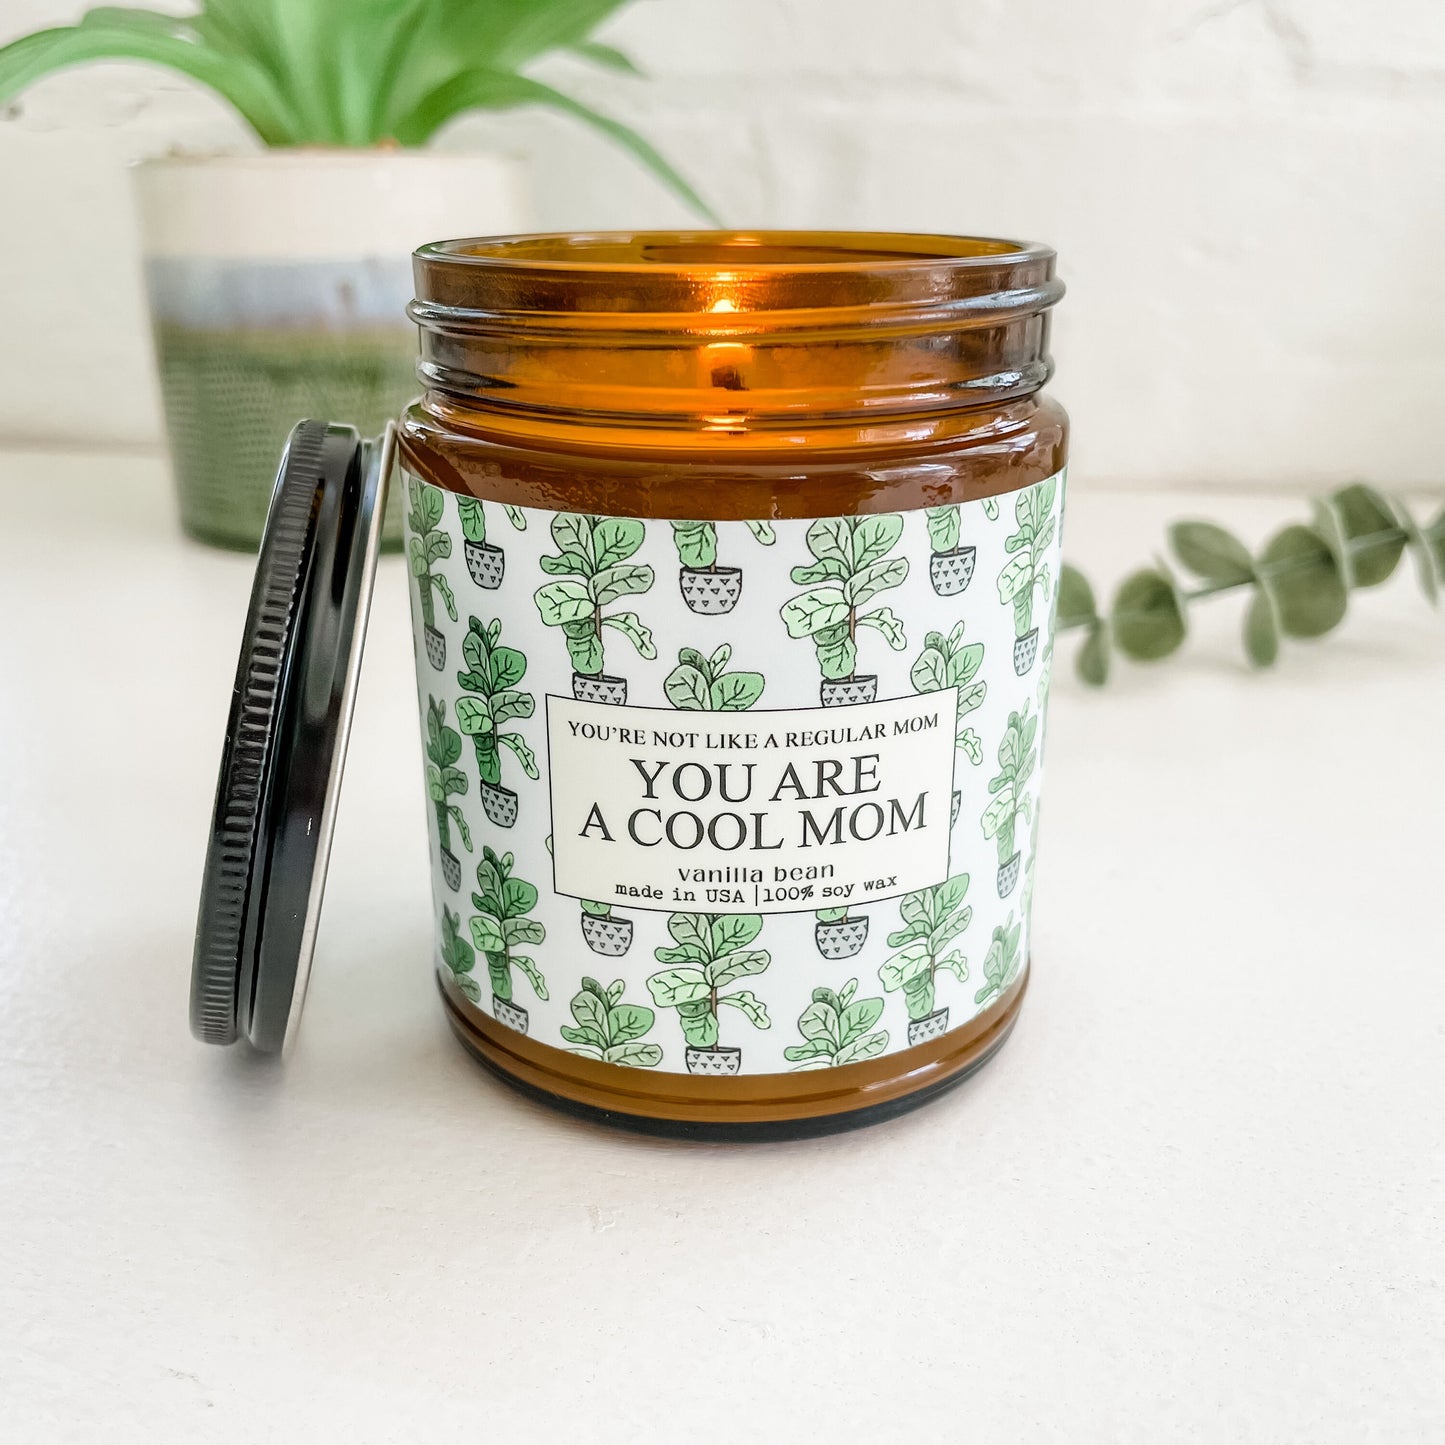 You're Not A Regular Mom, You Are A Cool Mom - 9oz Glass Jar Candle - Vanilla Bean Scent